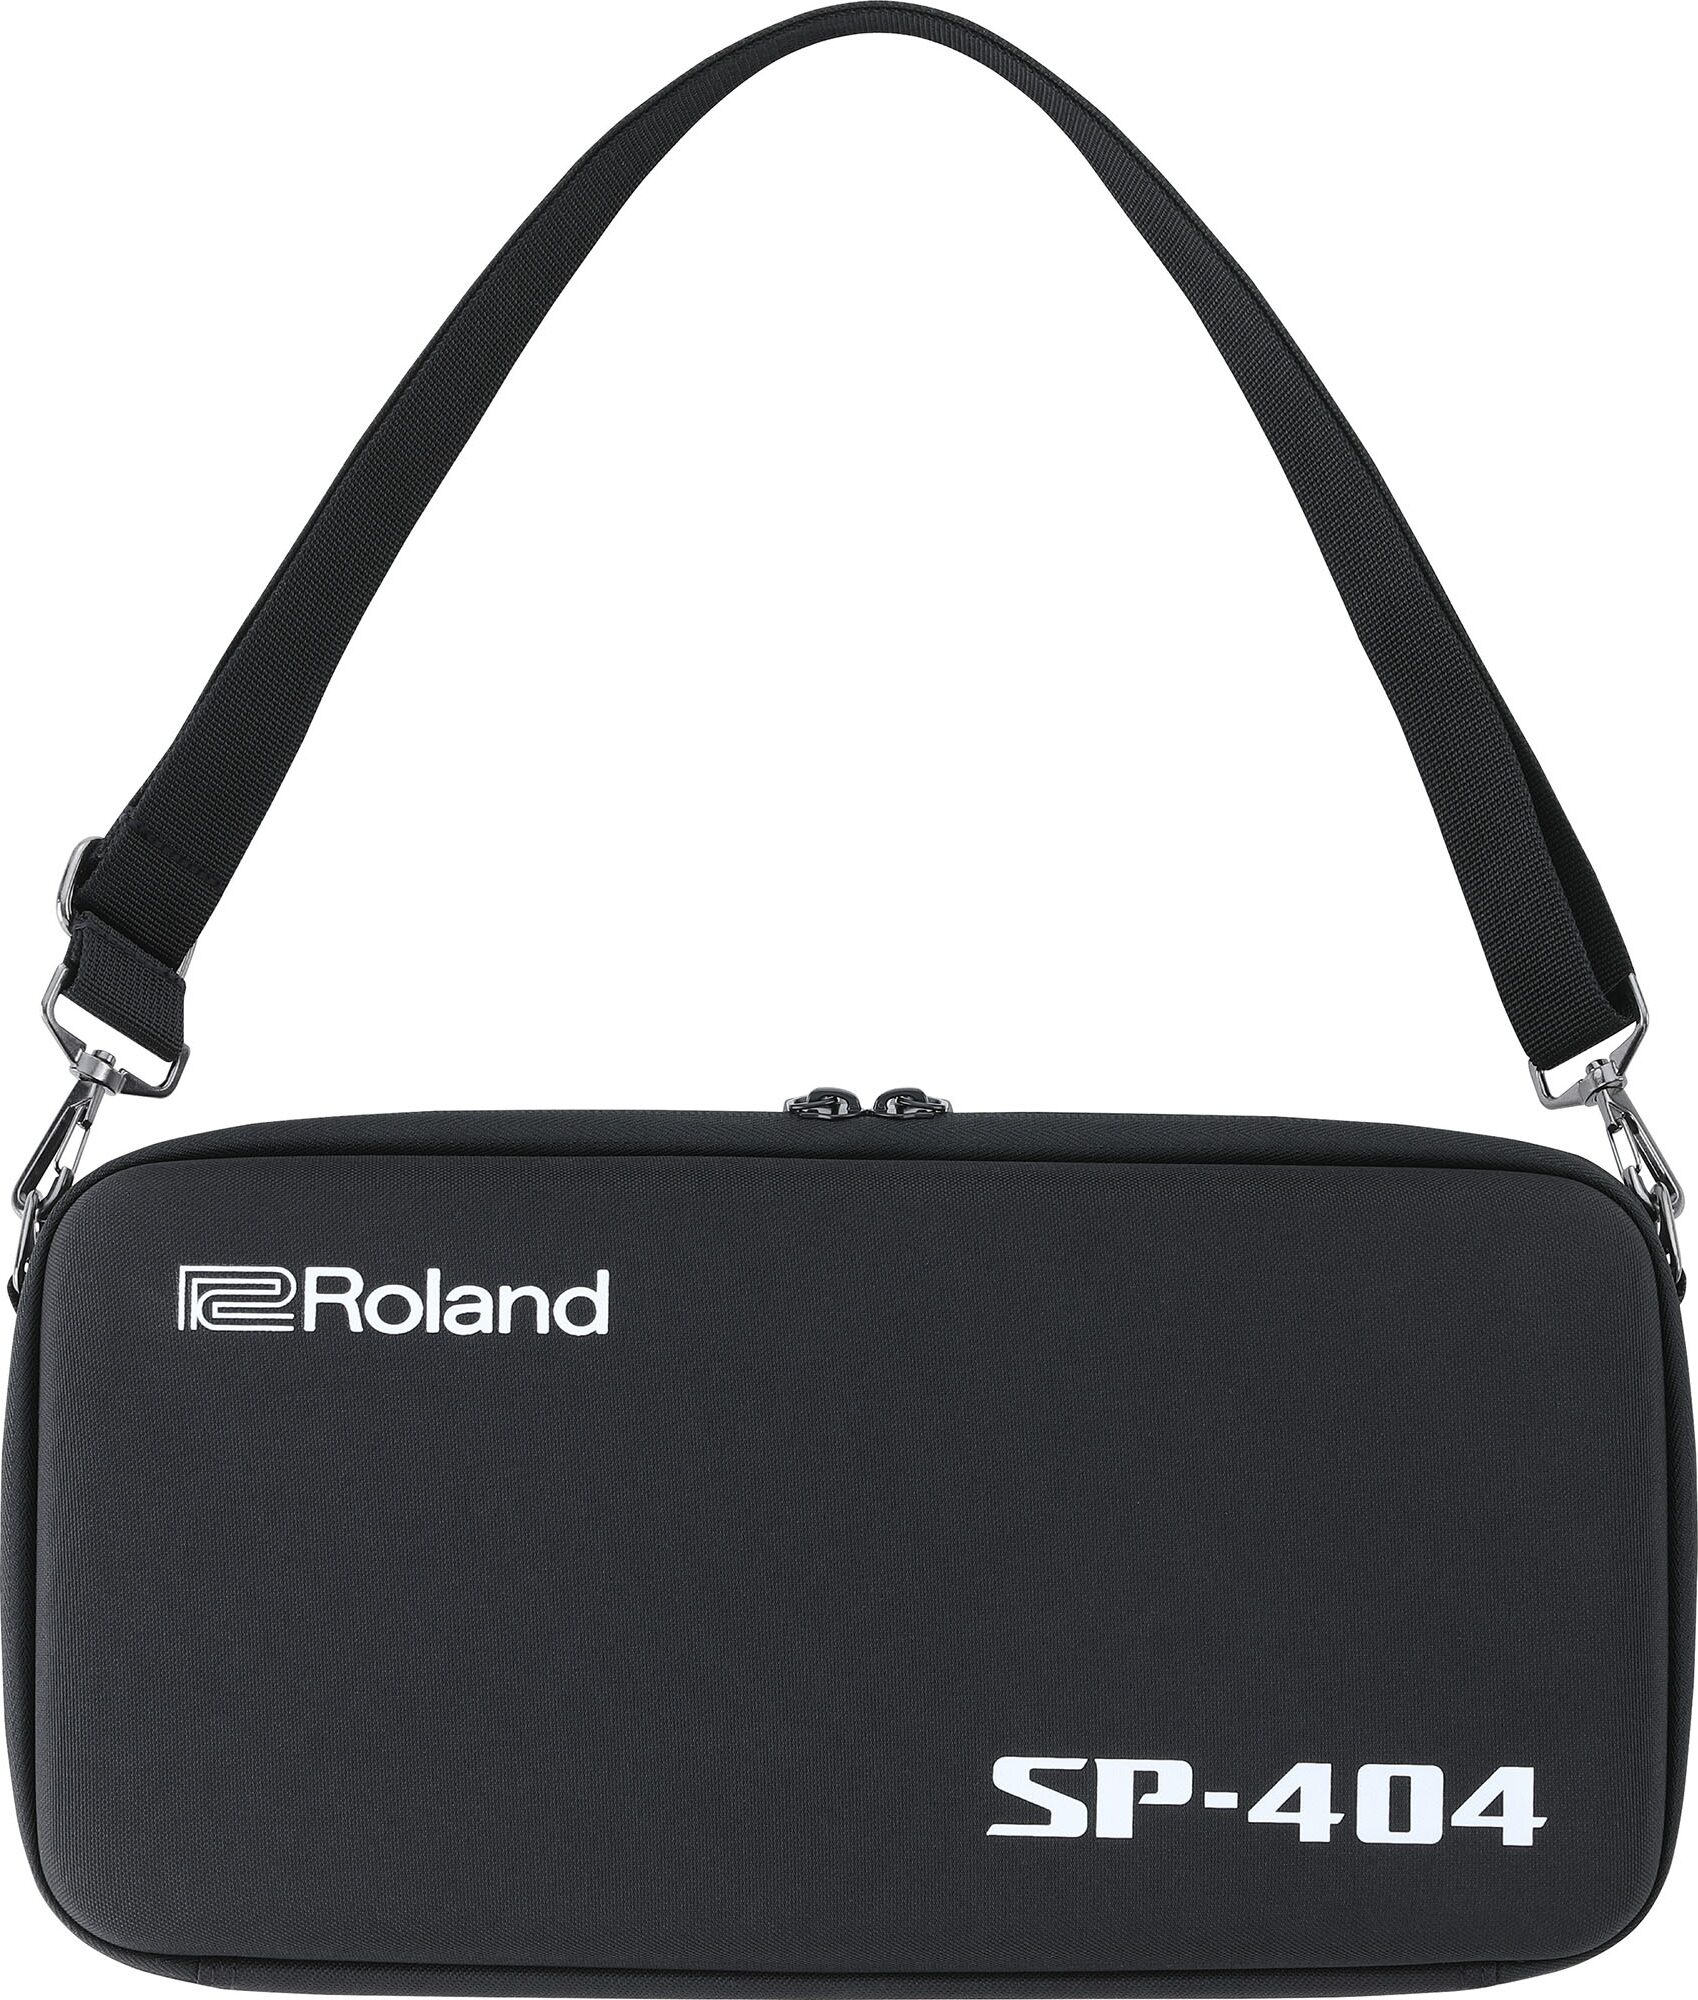 Roland CB-404 Carry Case for SP-404 MKII